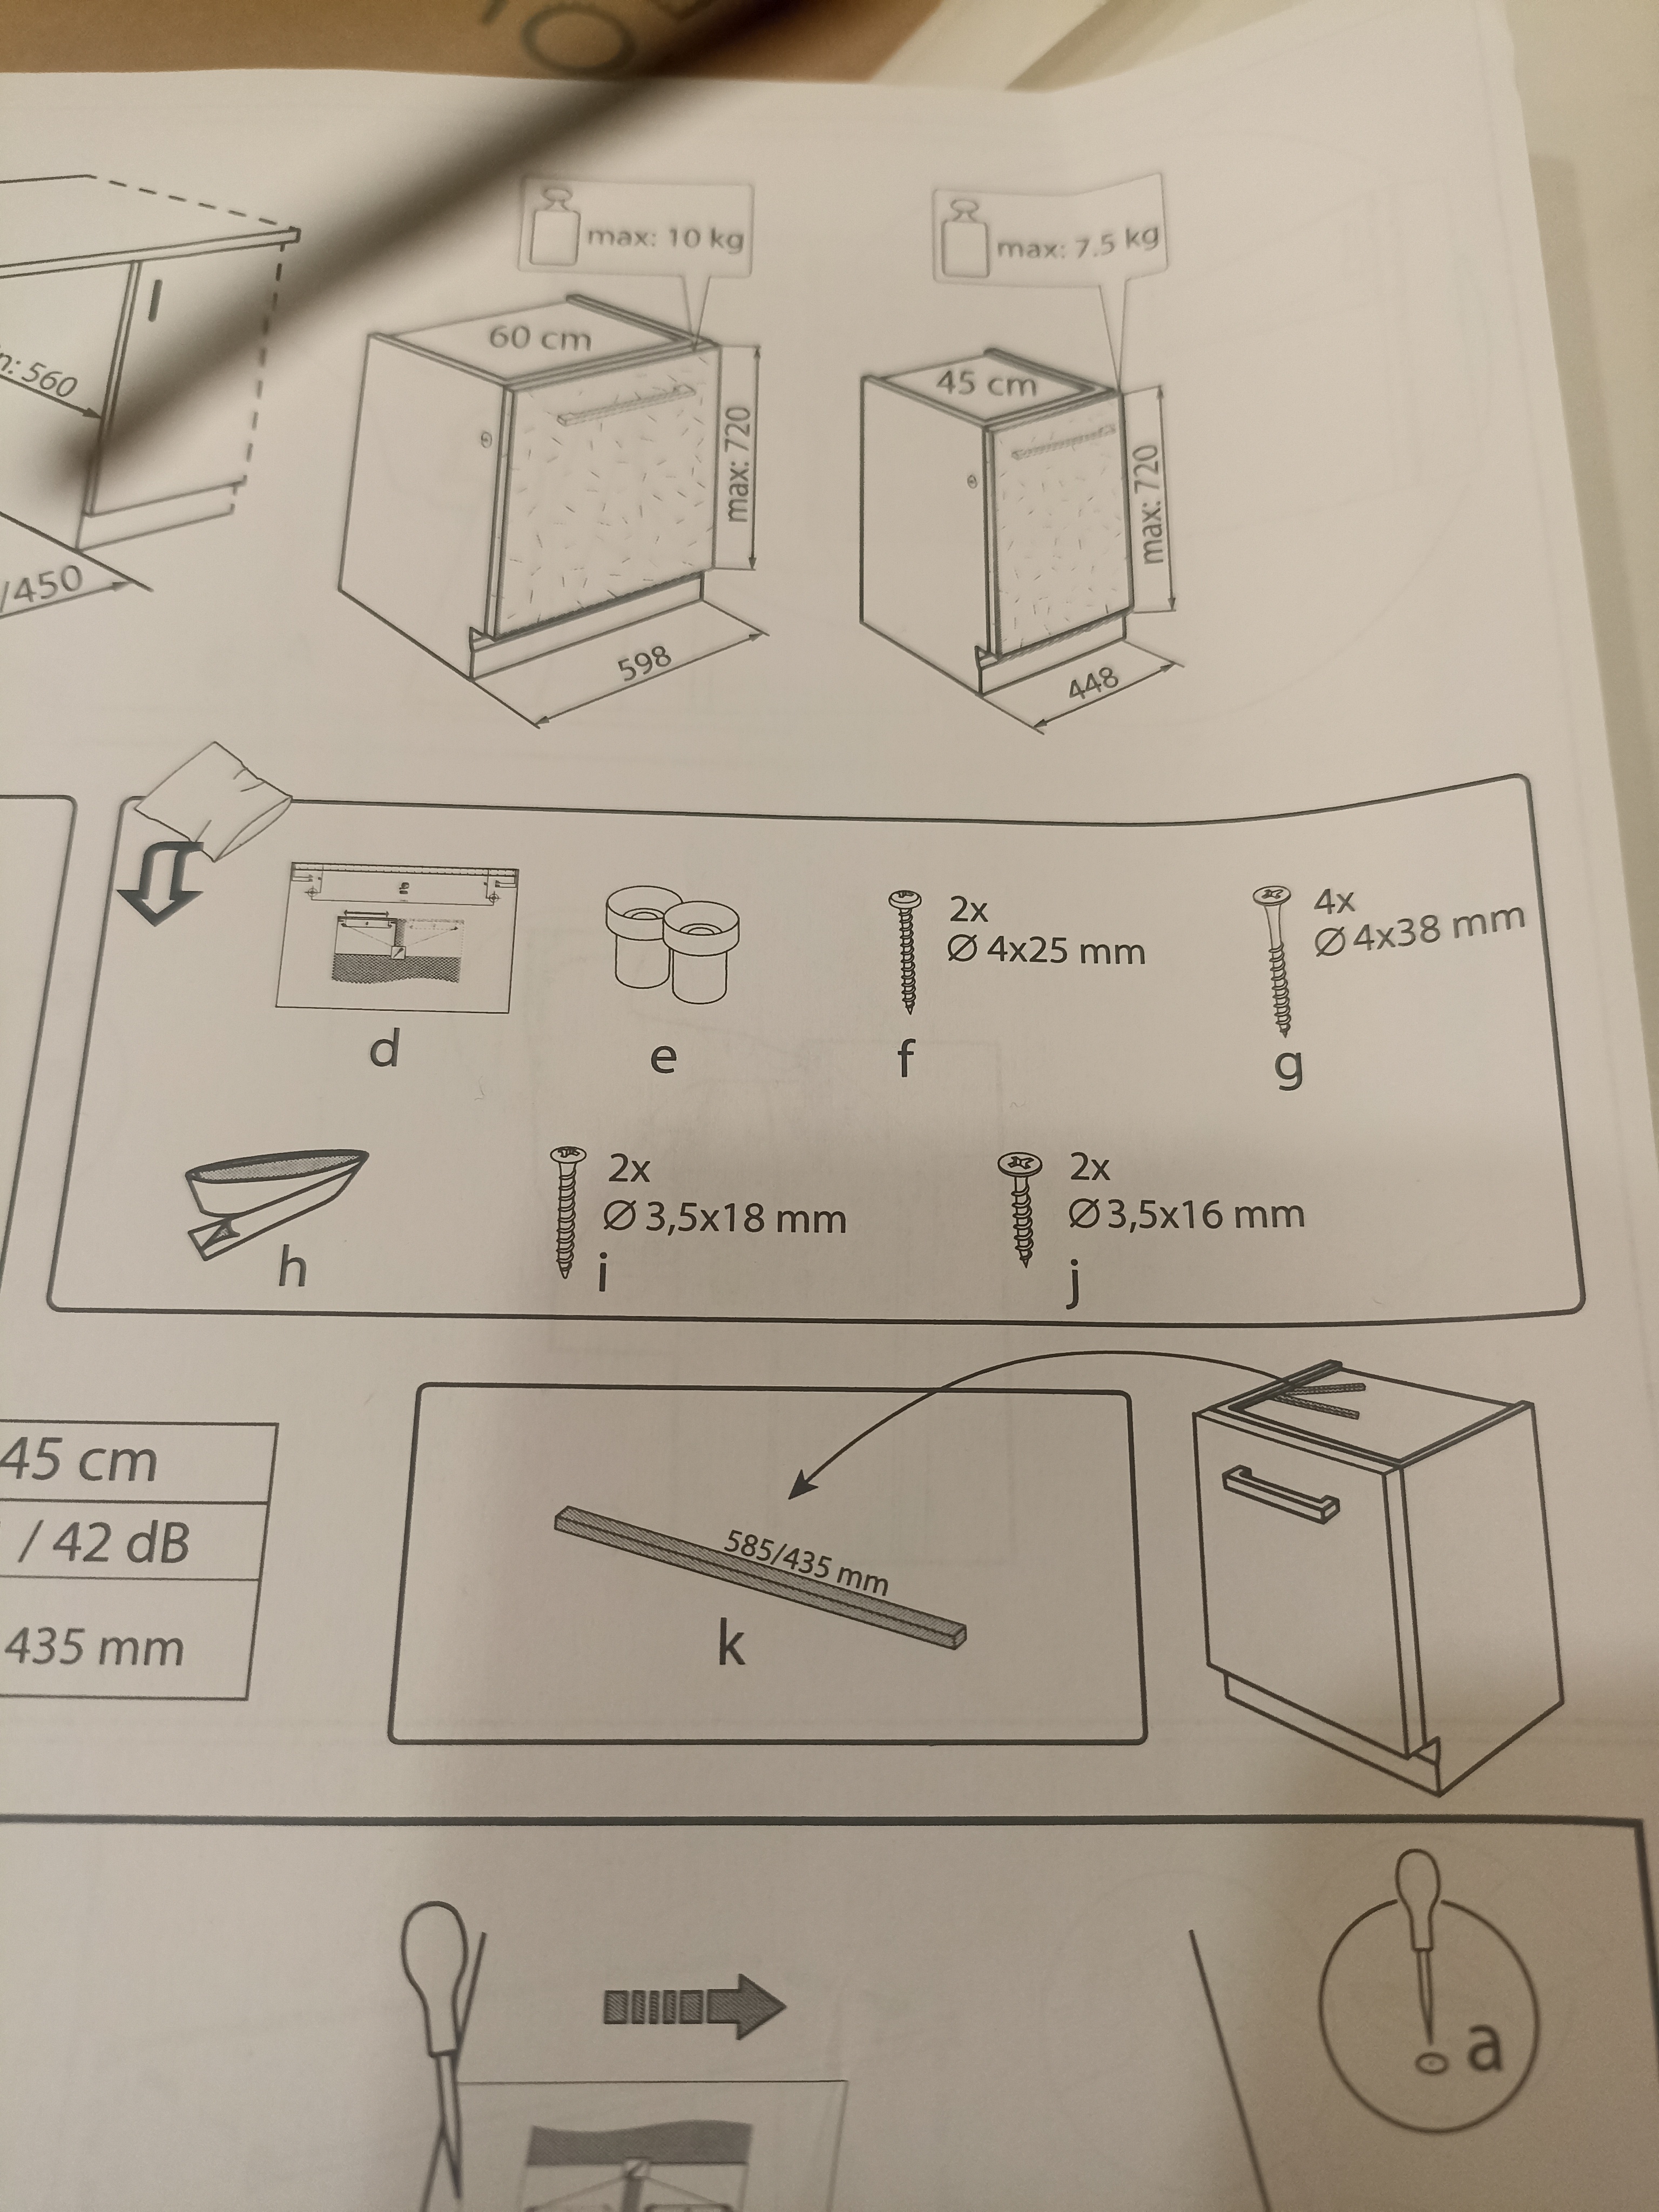 Hello.
I received a dishwasher without the K and H elements from the manual.